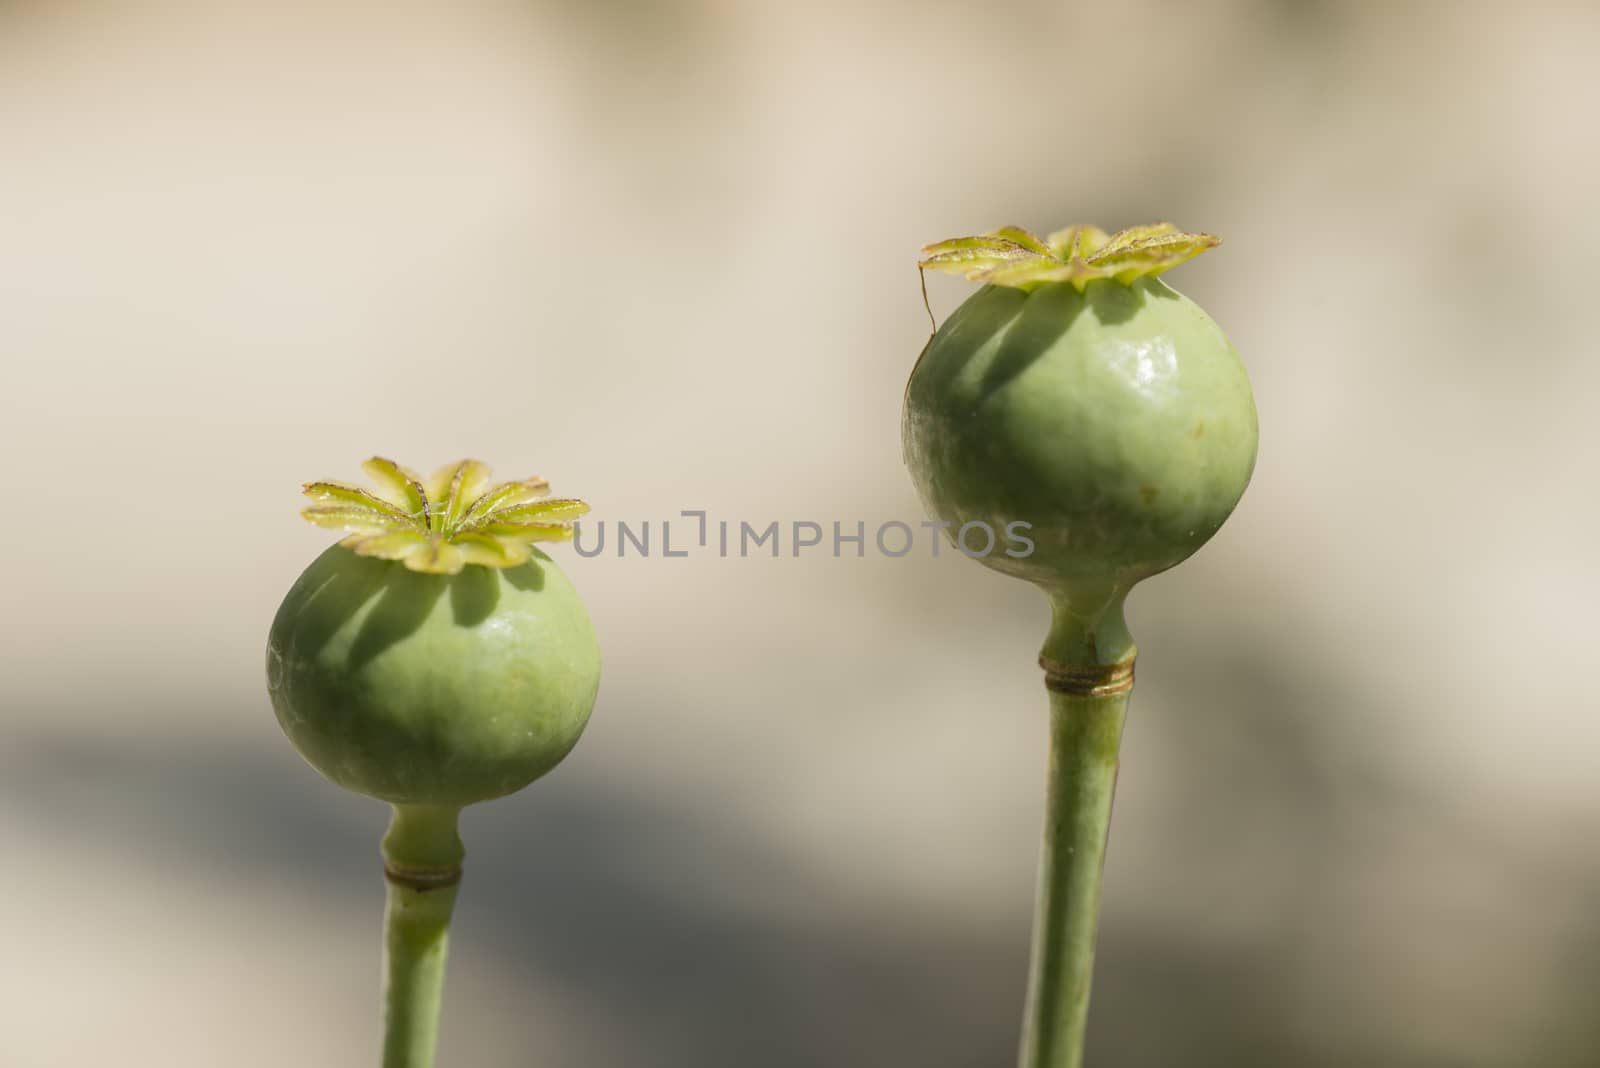 Flowers and seed pods of opium poppy plant by AlessandroZocc